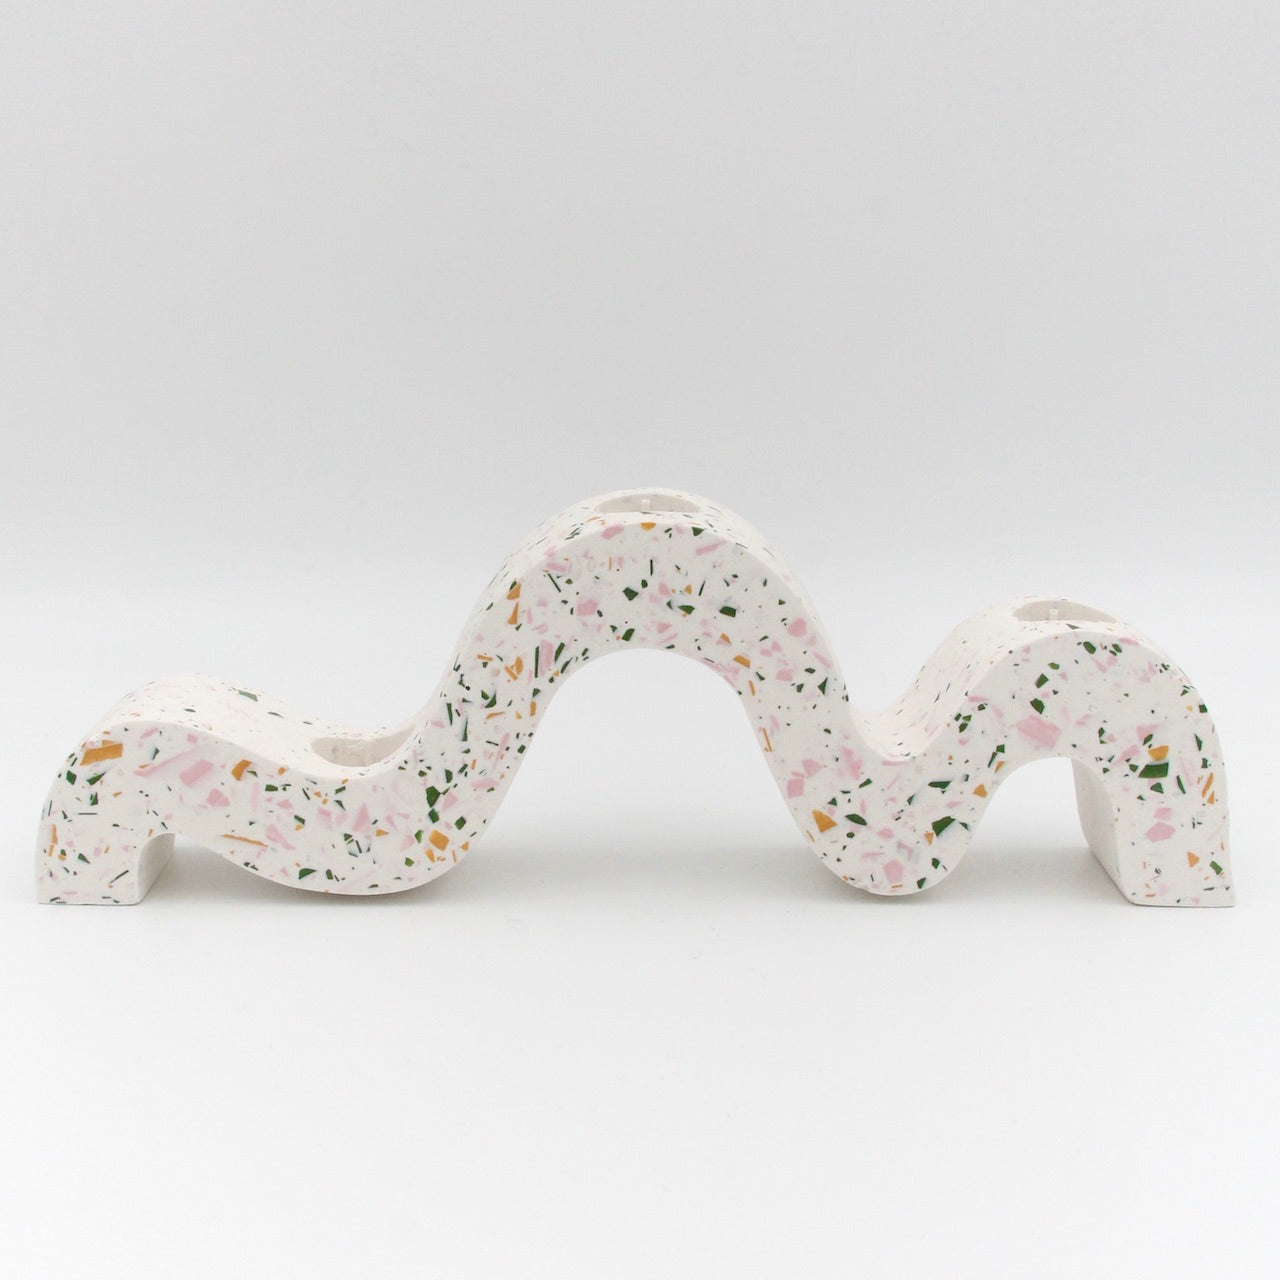 Wave candlestick - Late summer terrazzo